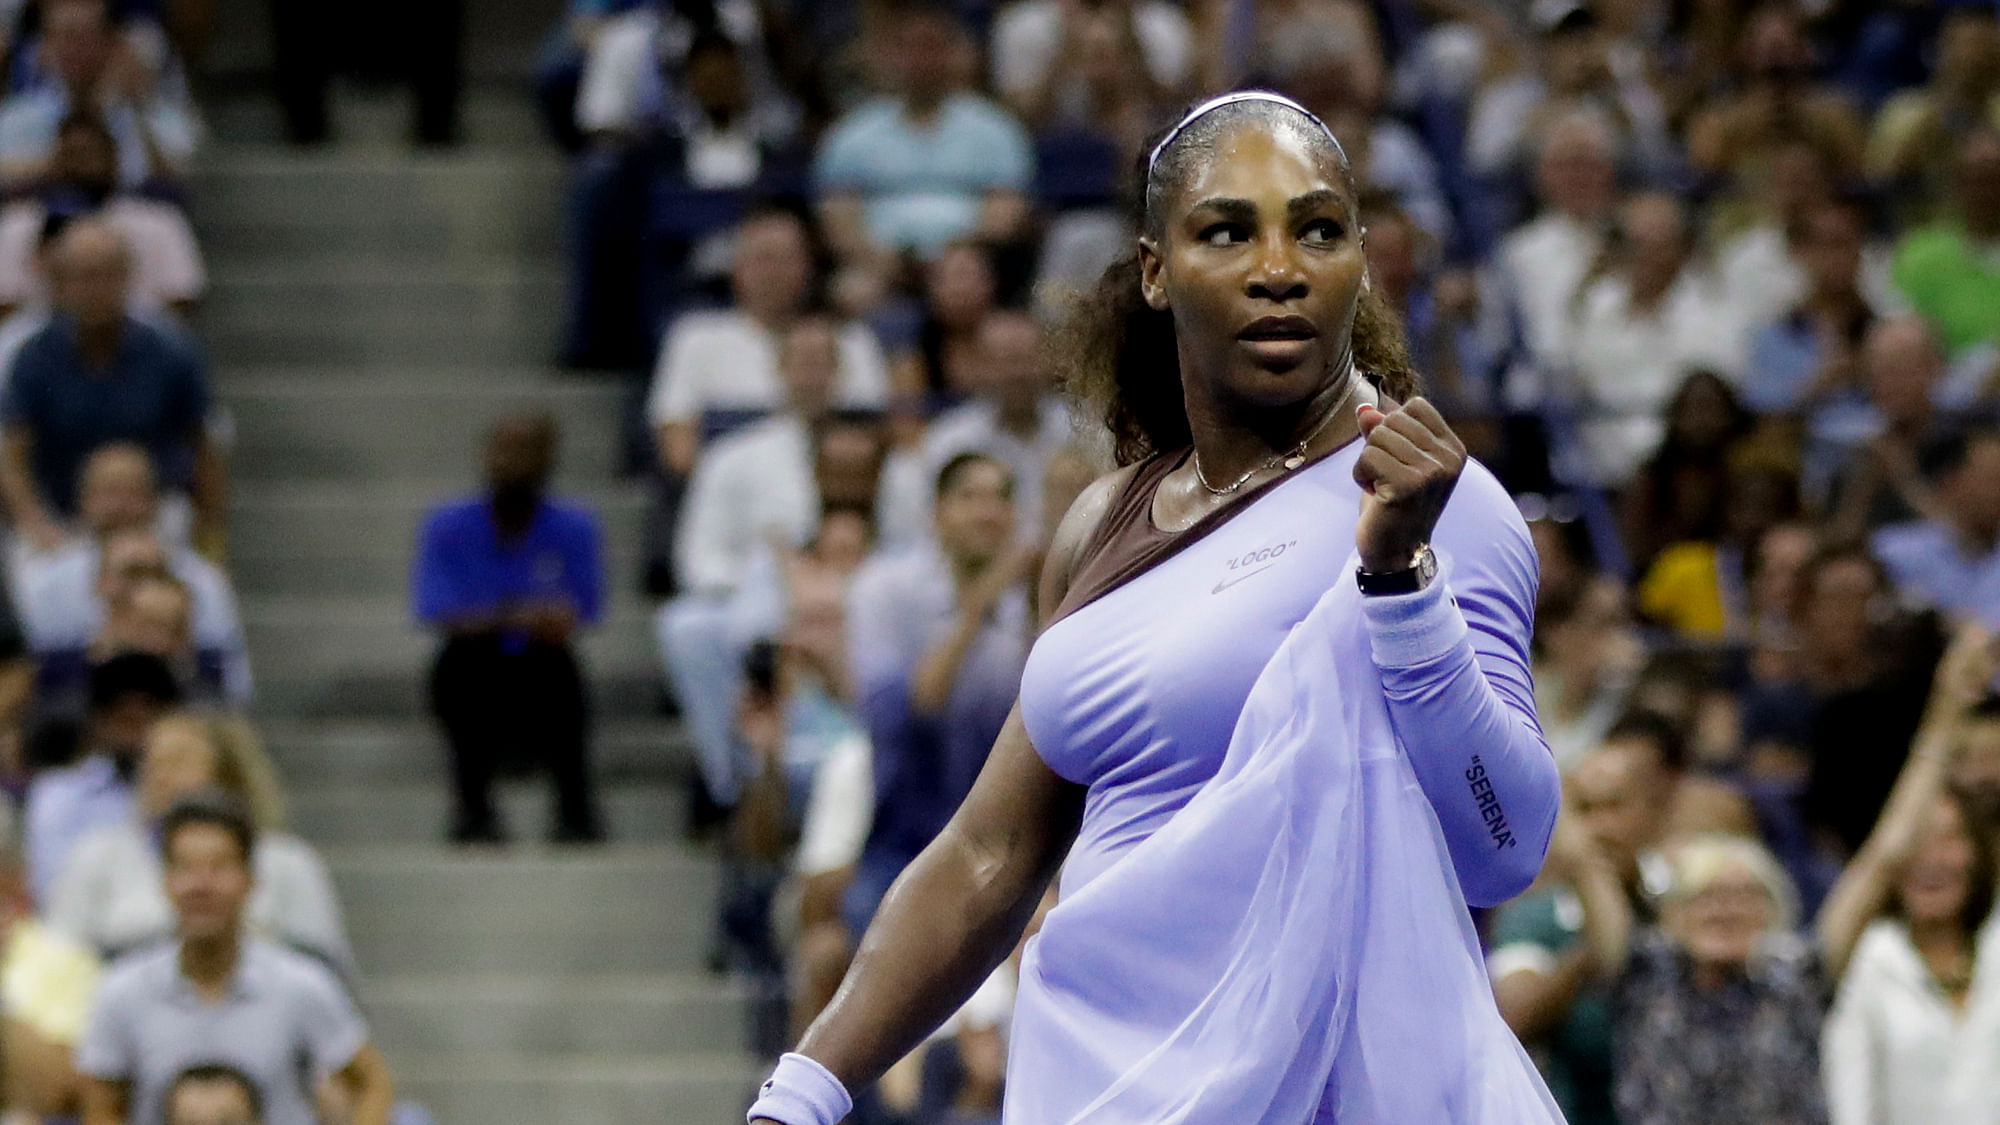 Serena Williams has entered the final of the 2018 US Open.